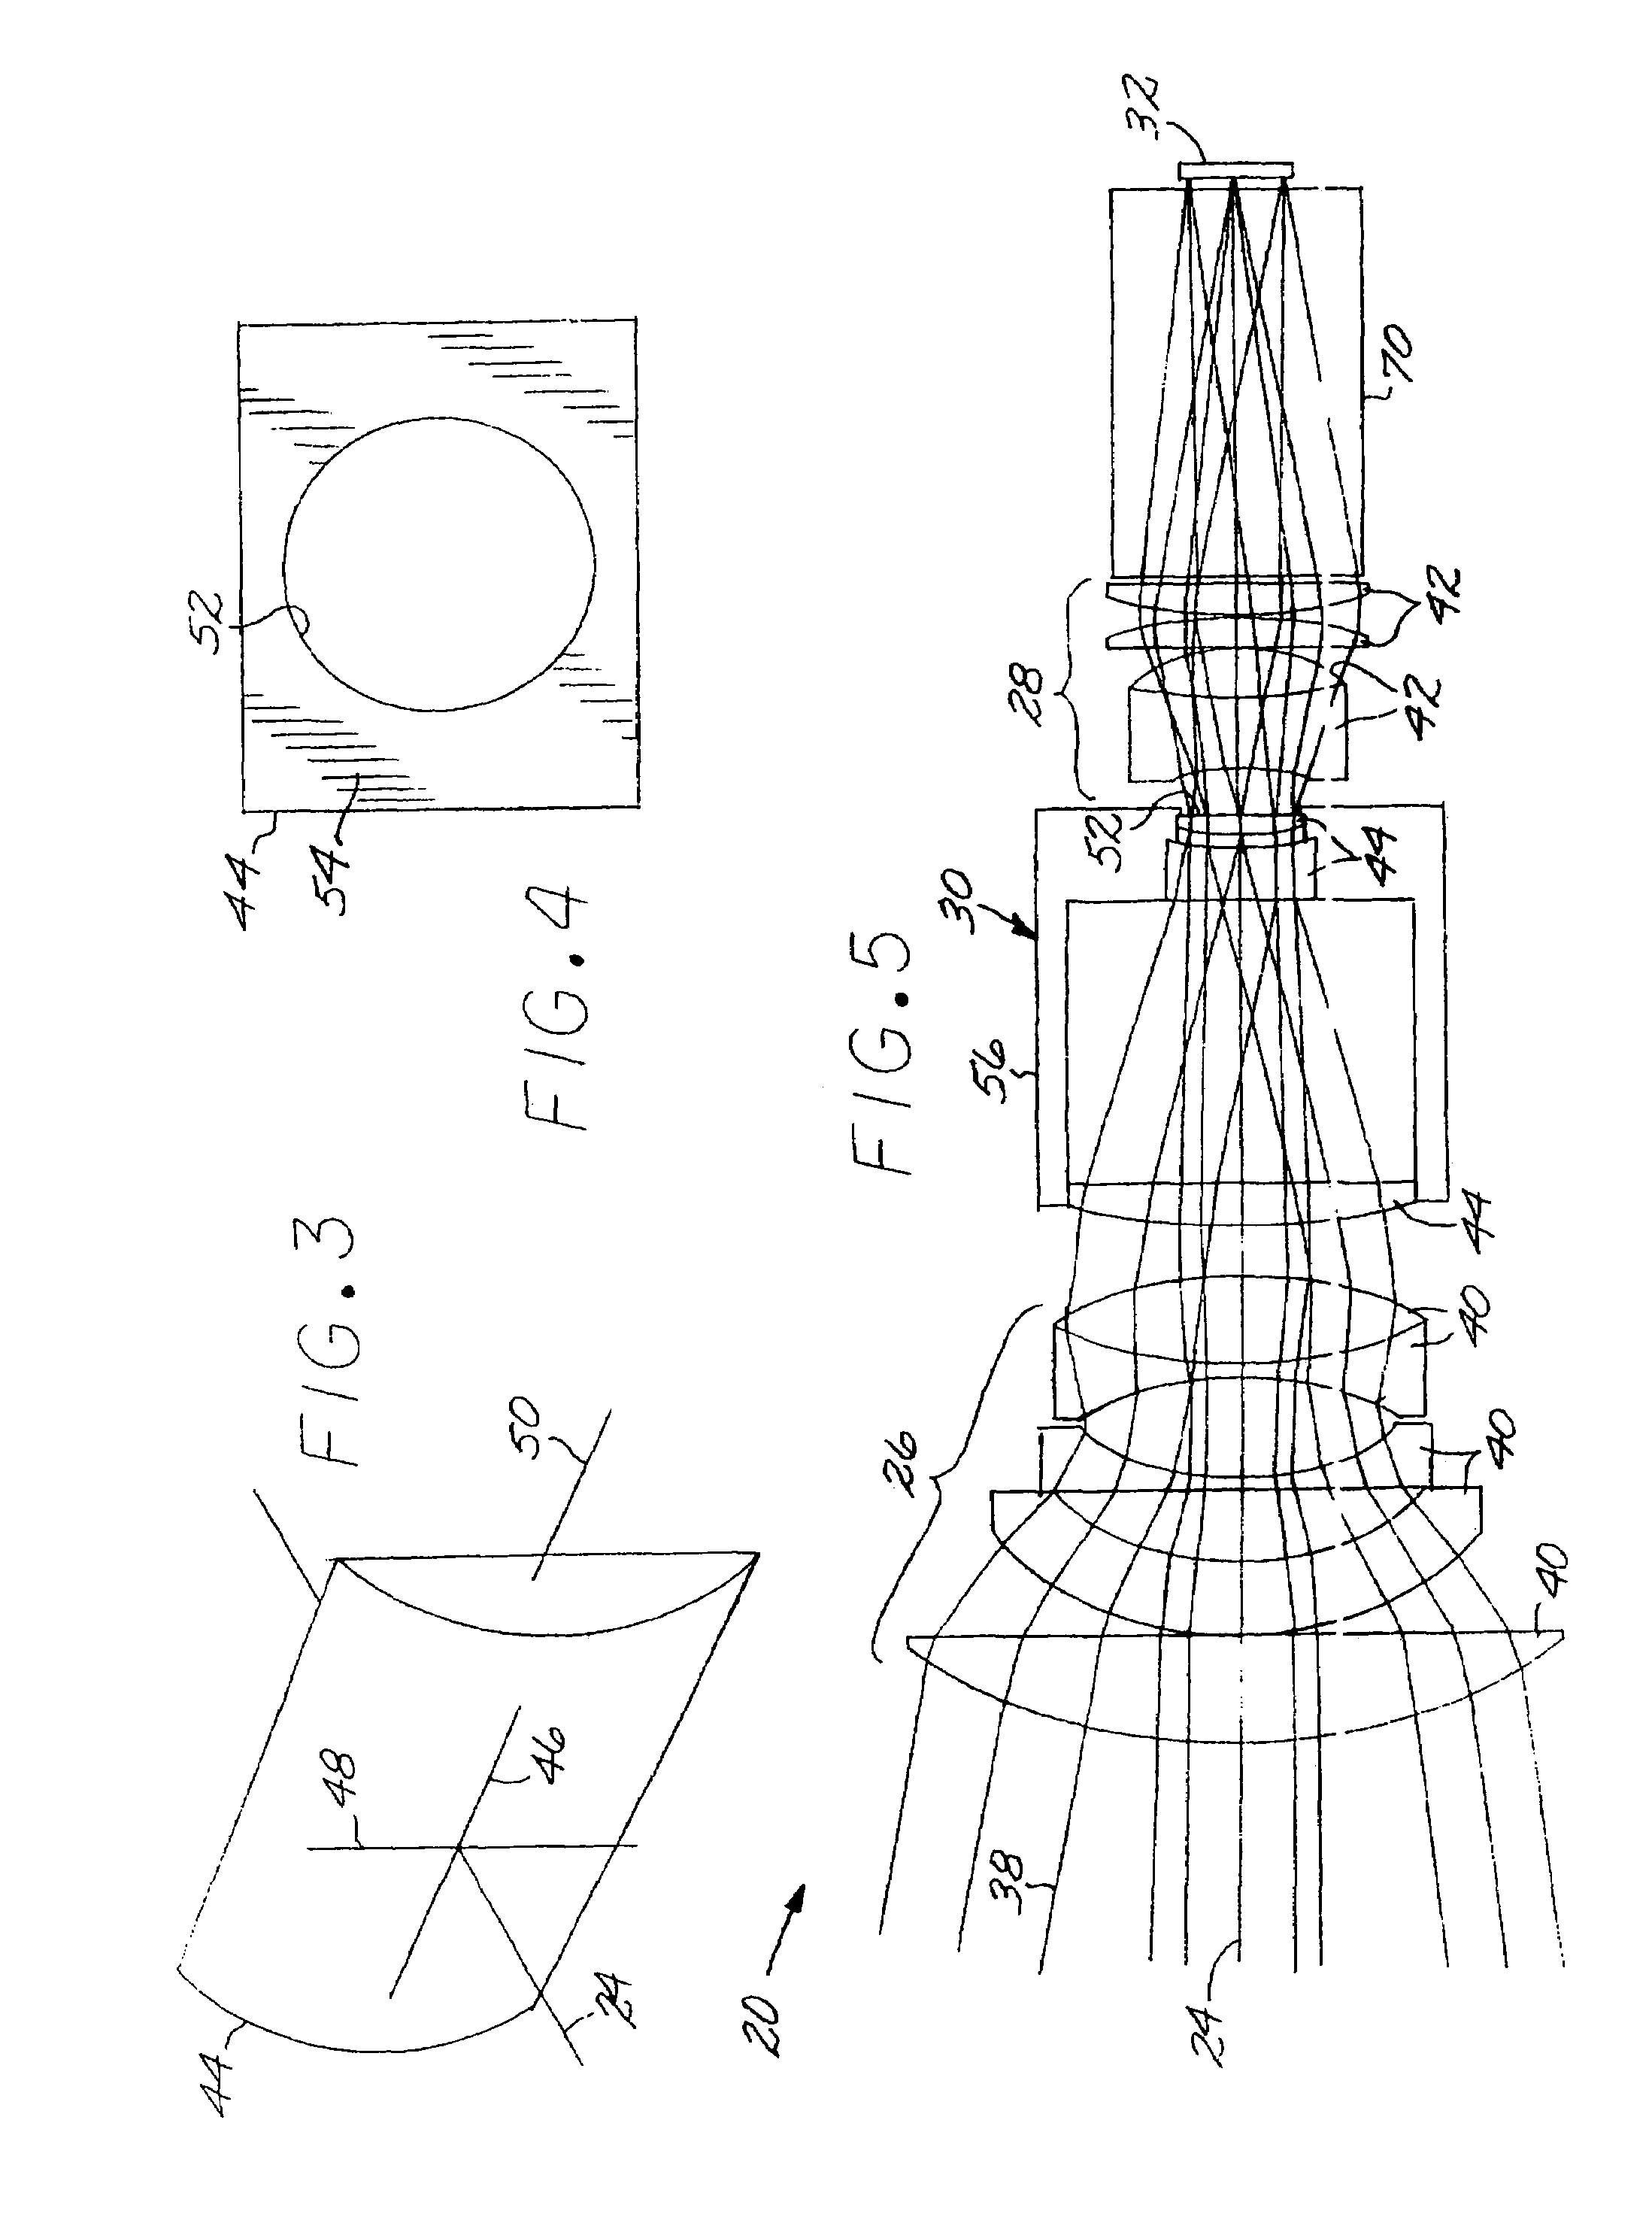 Optical system including an anamorphic lens